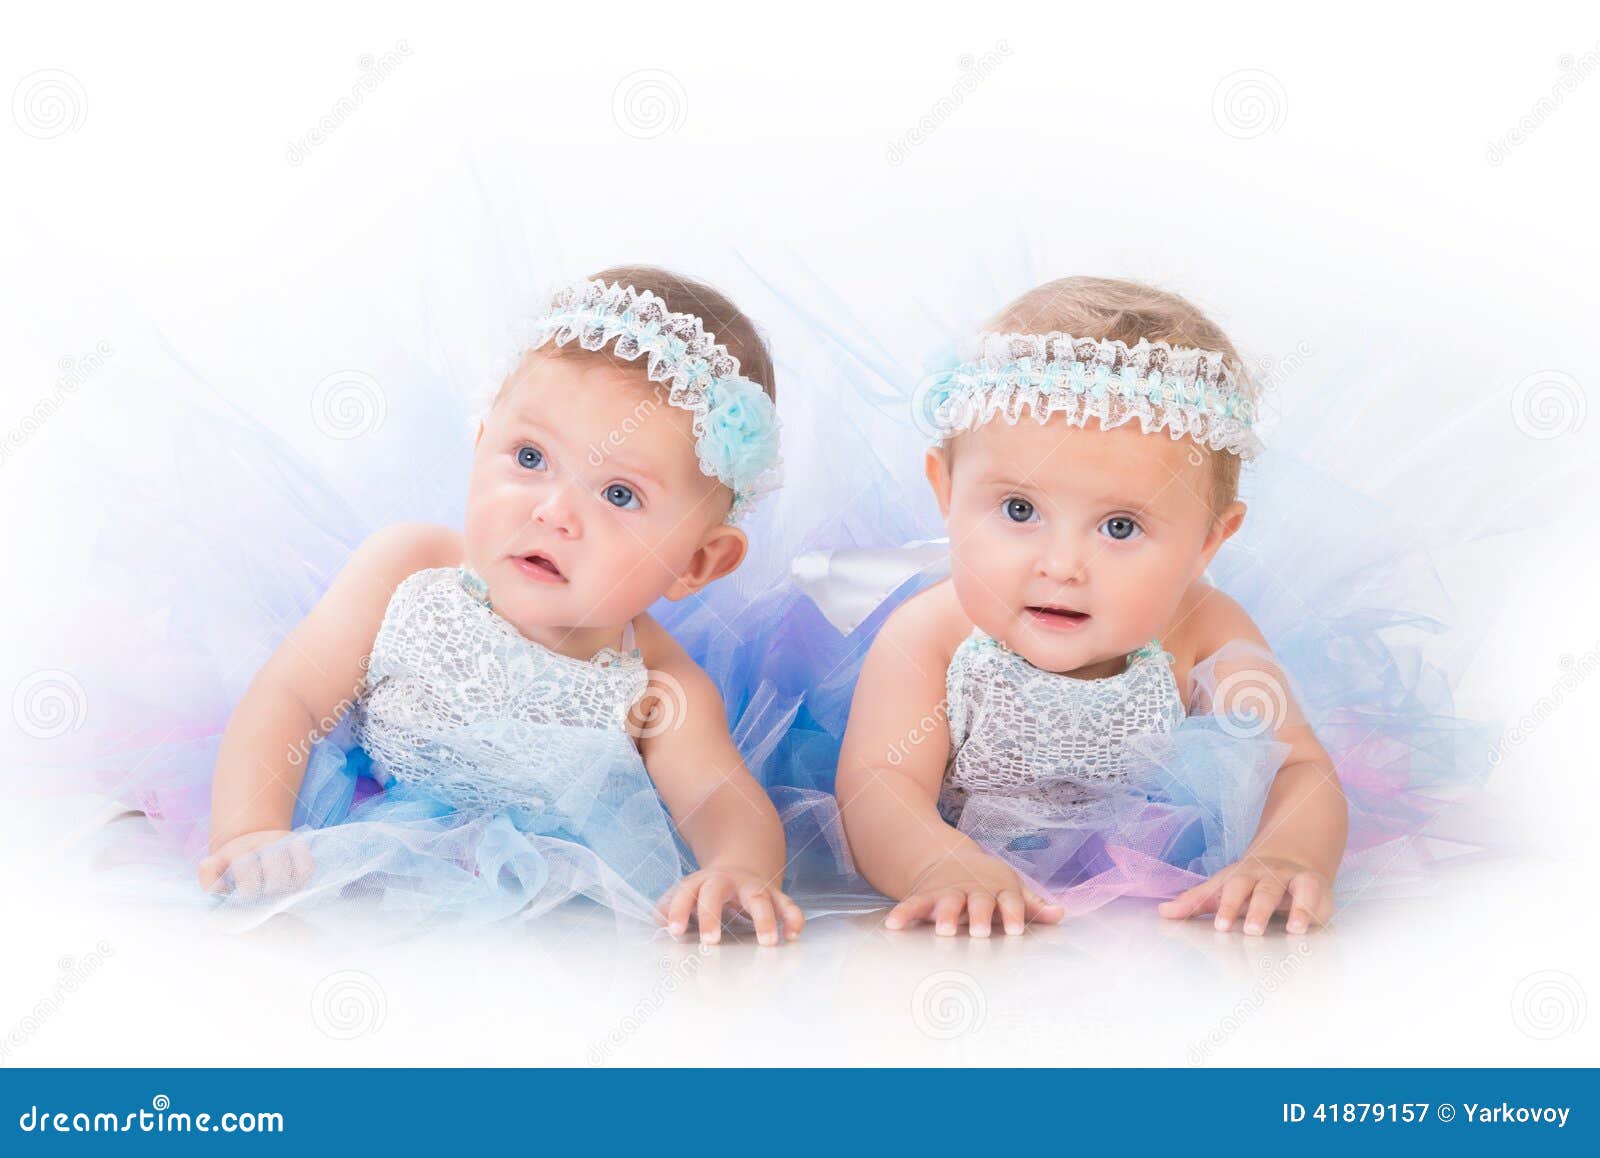 Two Charming Sisters Baby Twins In The Lush Beautiful Dresses Stock Image  Image of fours, blue 